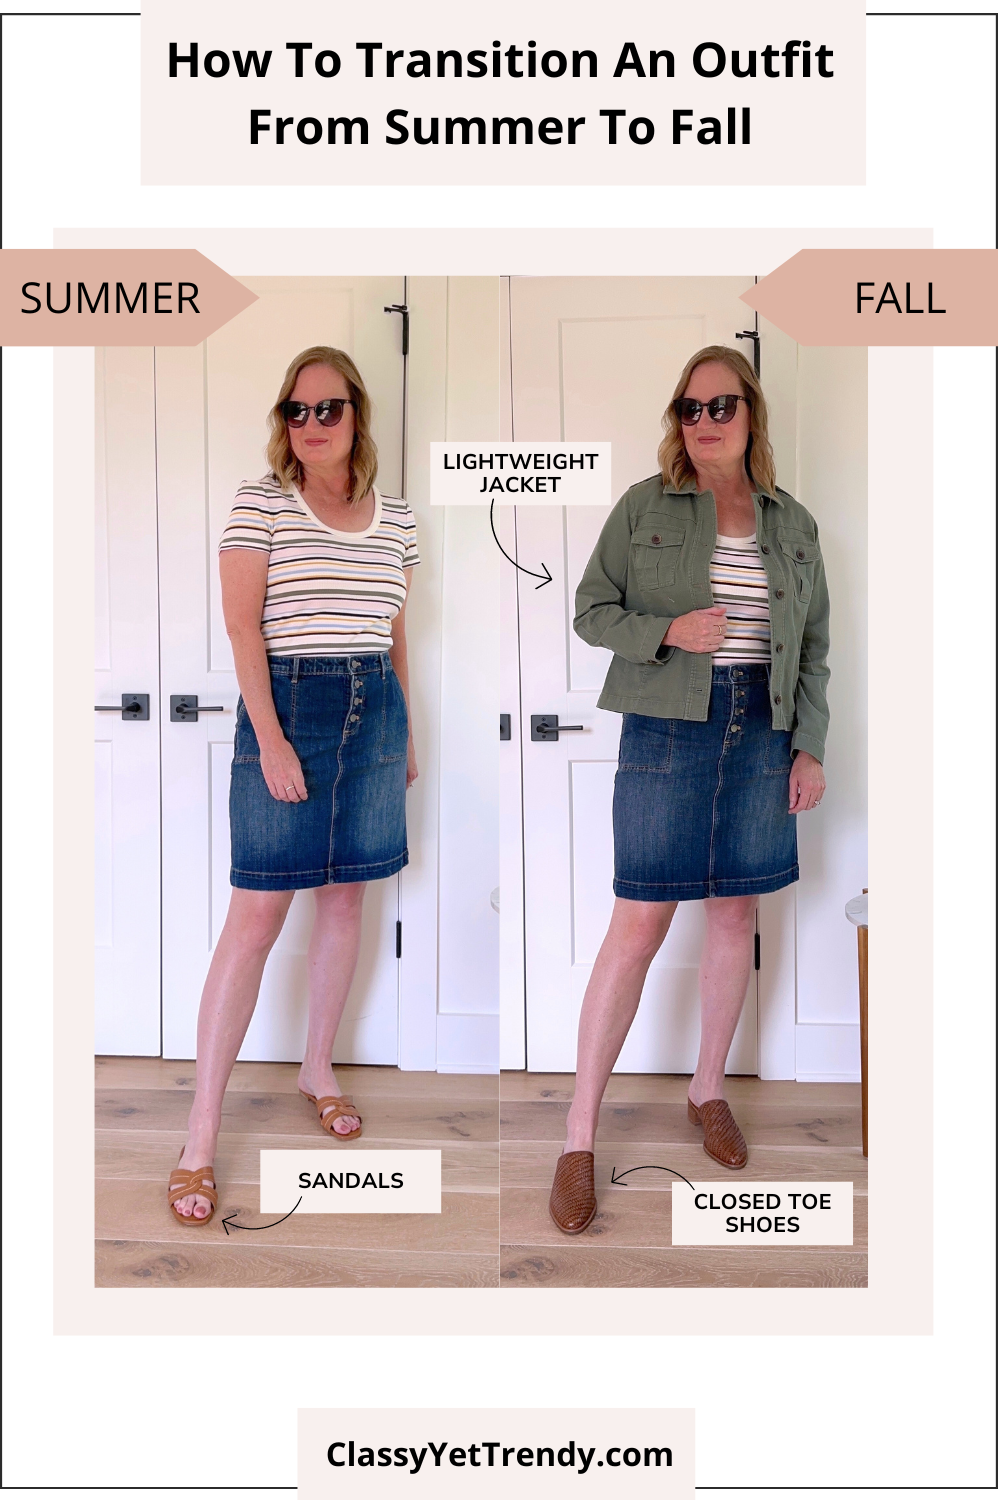 TRANSITIONAL OUTFITS